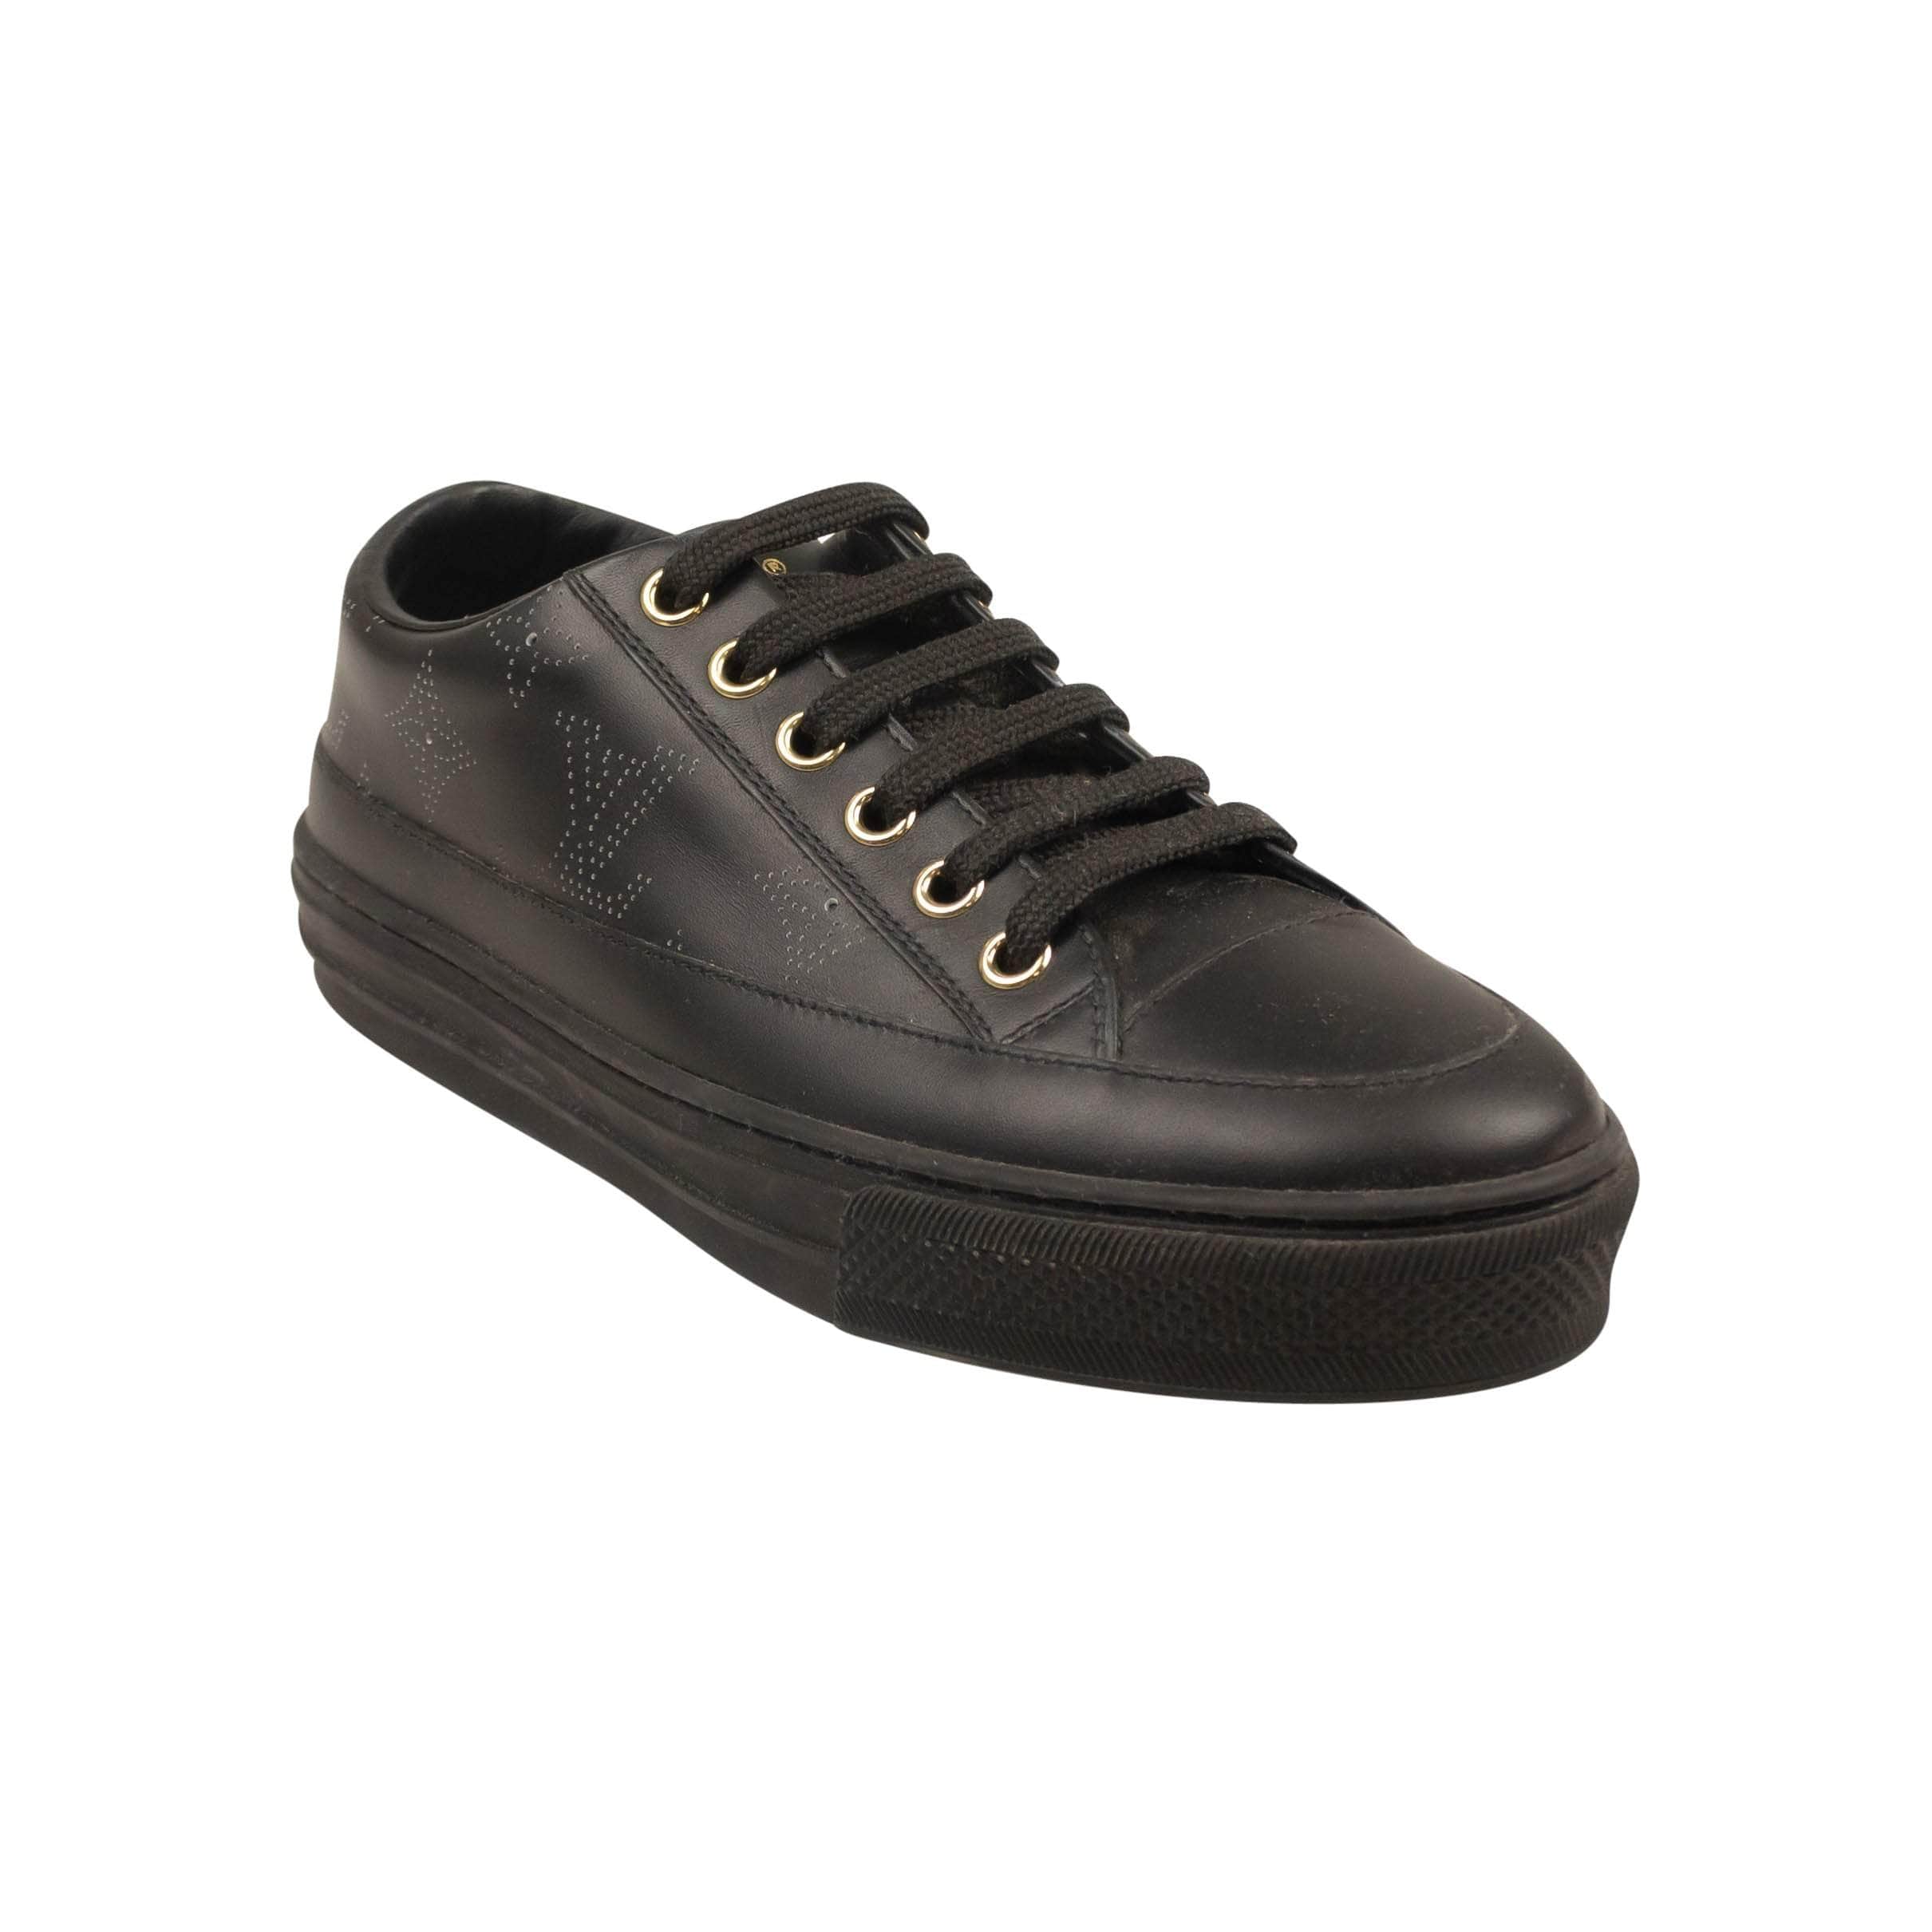 Louis Vuitton 500-750, channelenable-all, chicmi, couponcollection, gender-womens, main-shoes, size-4-5-us-34-5-eu, SPO, stadiumgoods 4.5 US / 34.5 EU Black Leather Stellar Low Top Sneakers 95-LVT-2012/34.5 95-LVT-2012/34.5